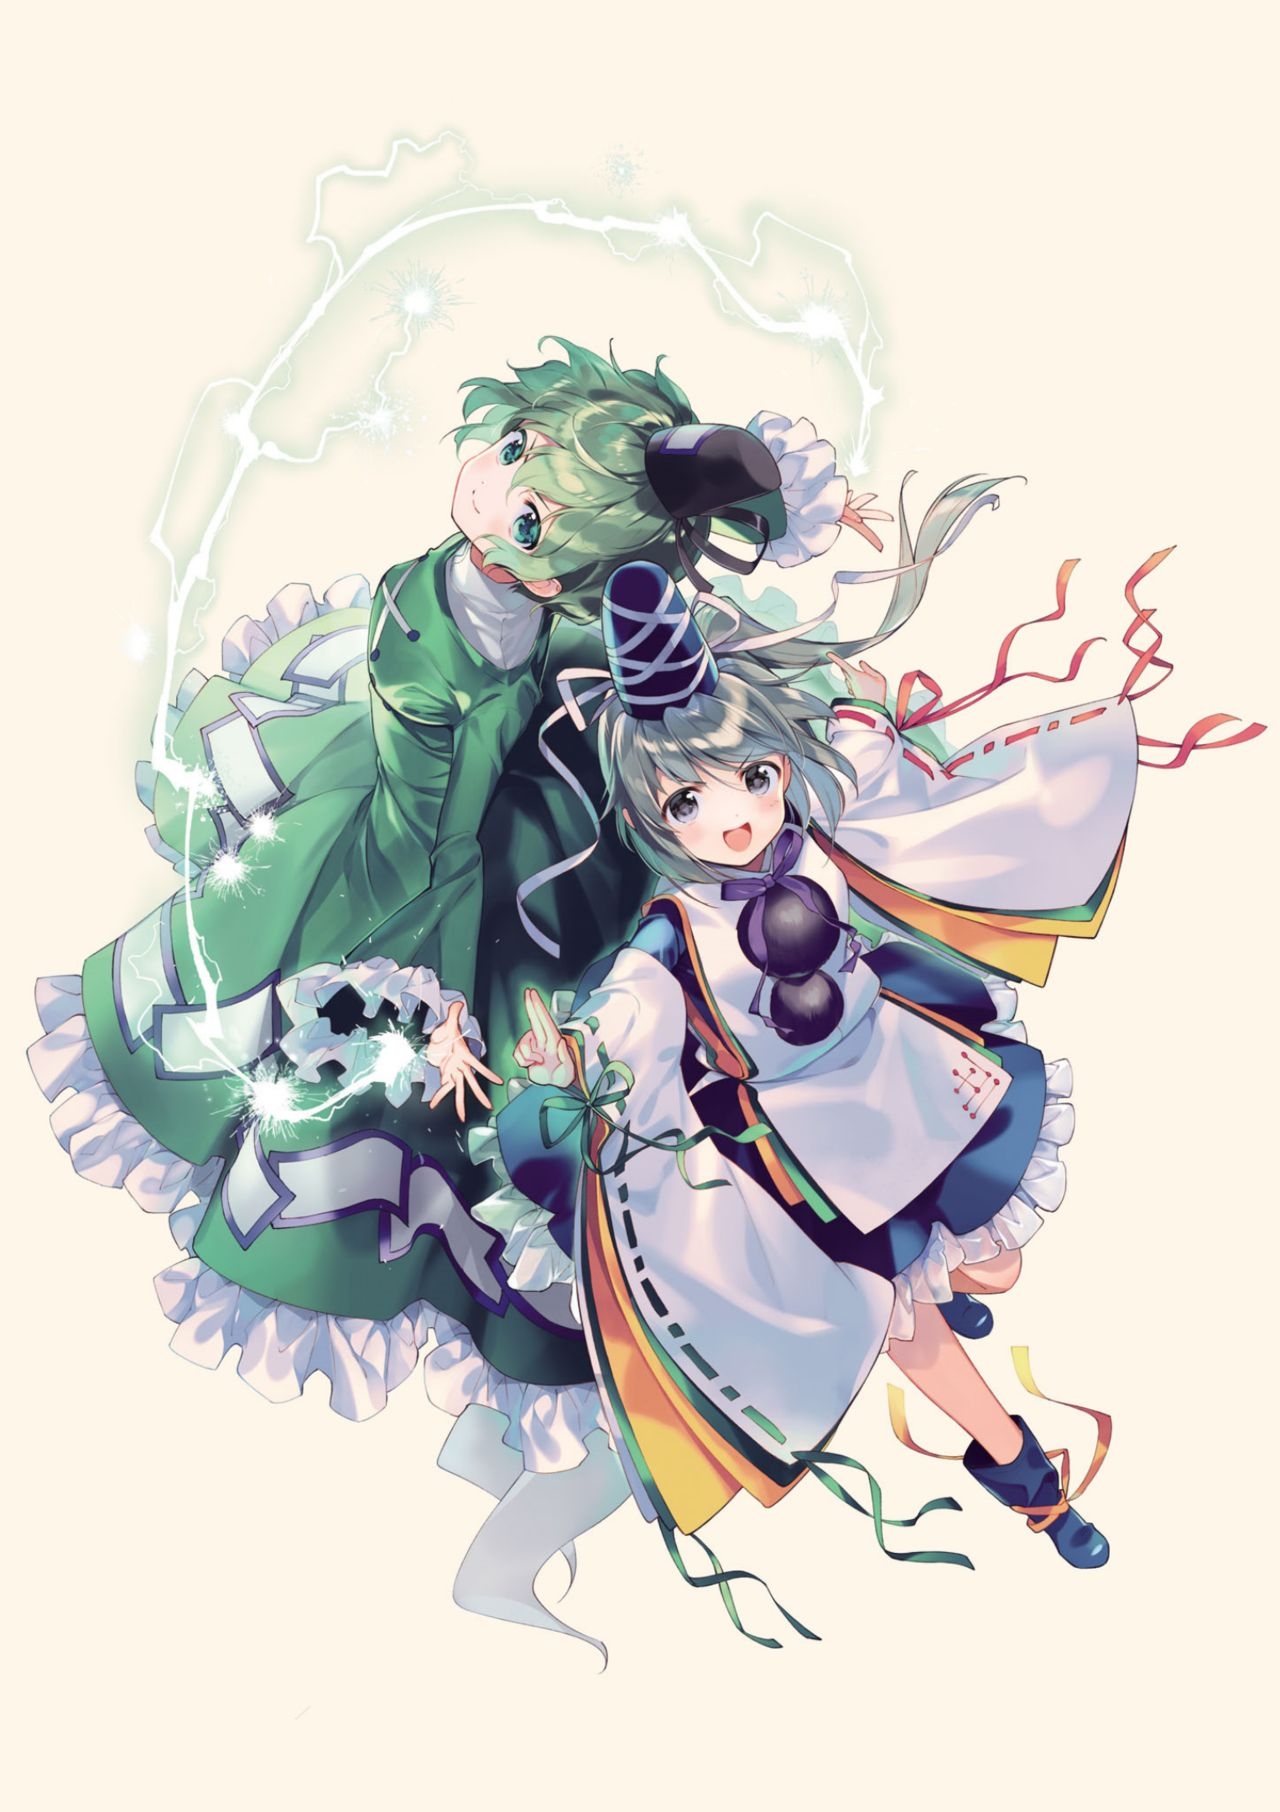 [Zun]Touhou Project Who's Who of Humans & Youkai - Dusk Edition illustrations 37